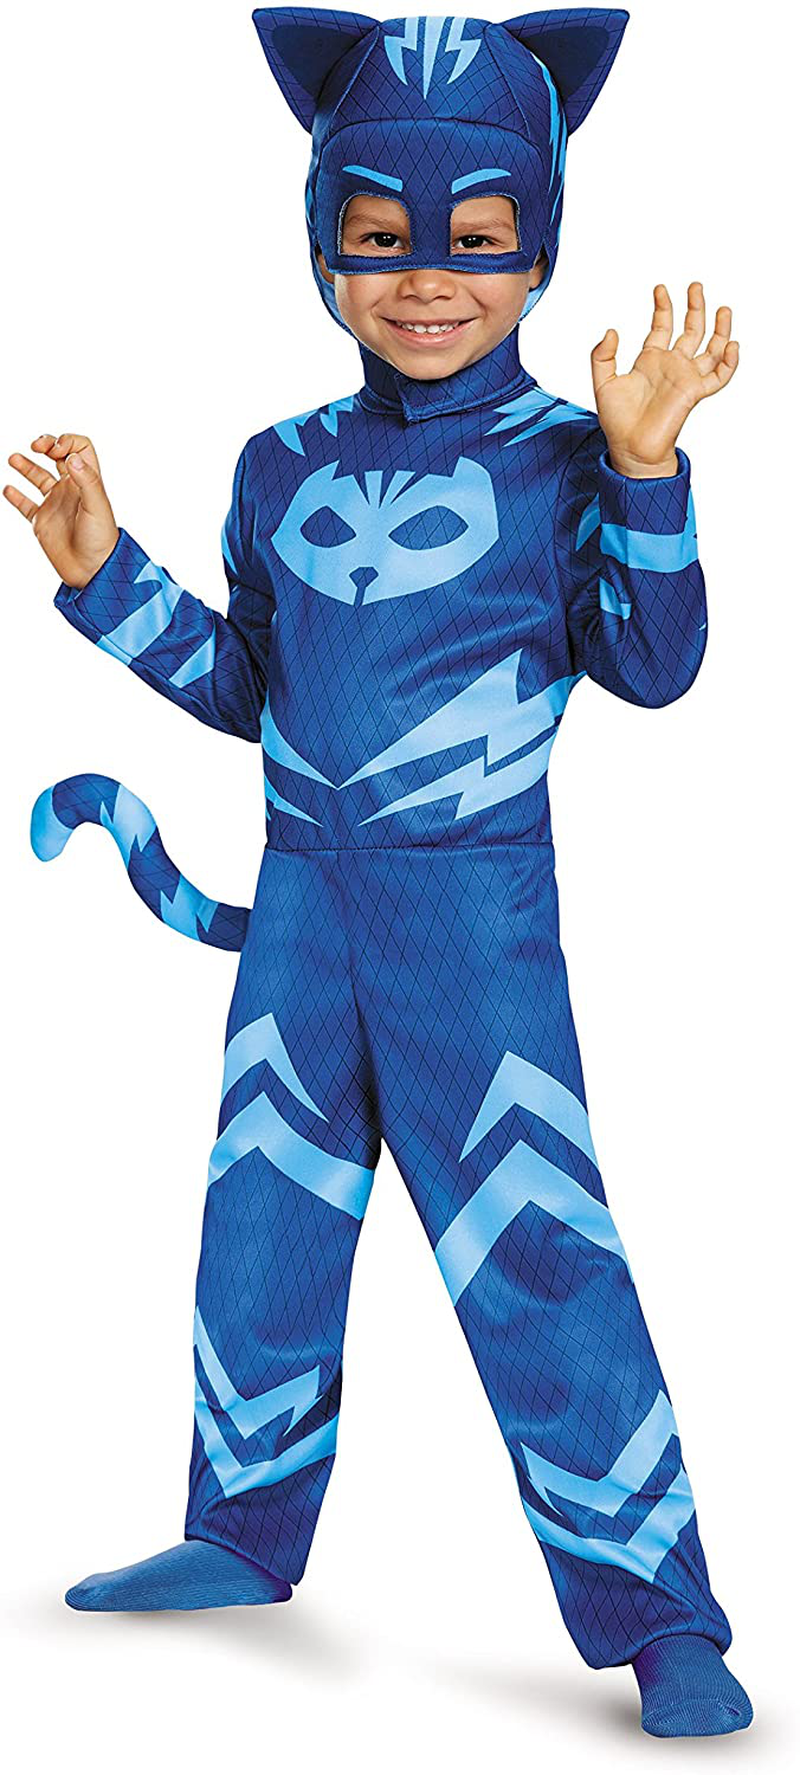 Disguise Gekko Classic Toddler PJ Masks Costume, Large/4-6 Green Apparel & Accessories > Costumes & Accessories > Costumes Disguise Costumes - Toys Division Catboy Costume Large (4-6)